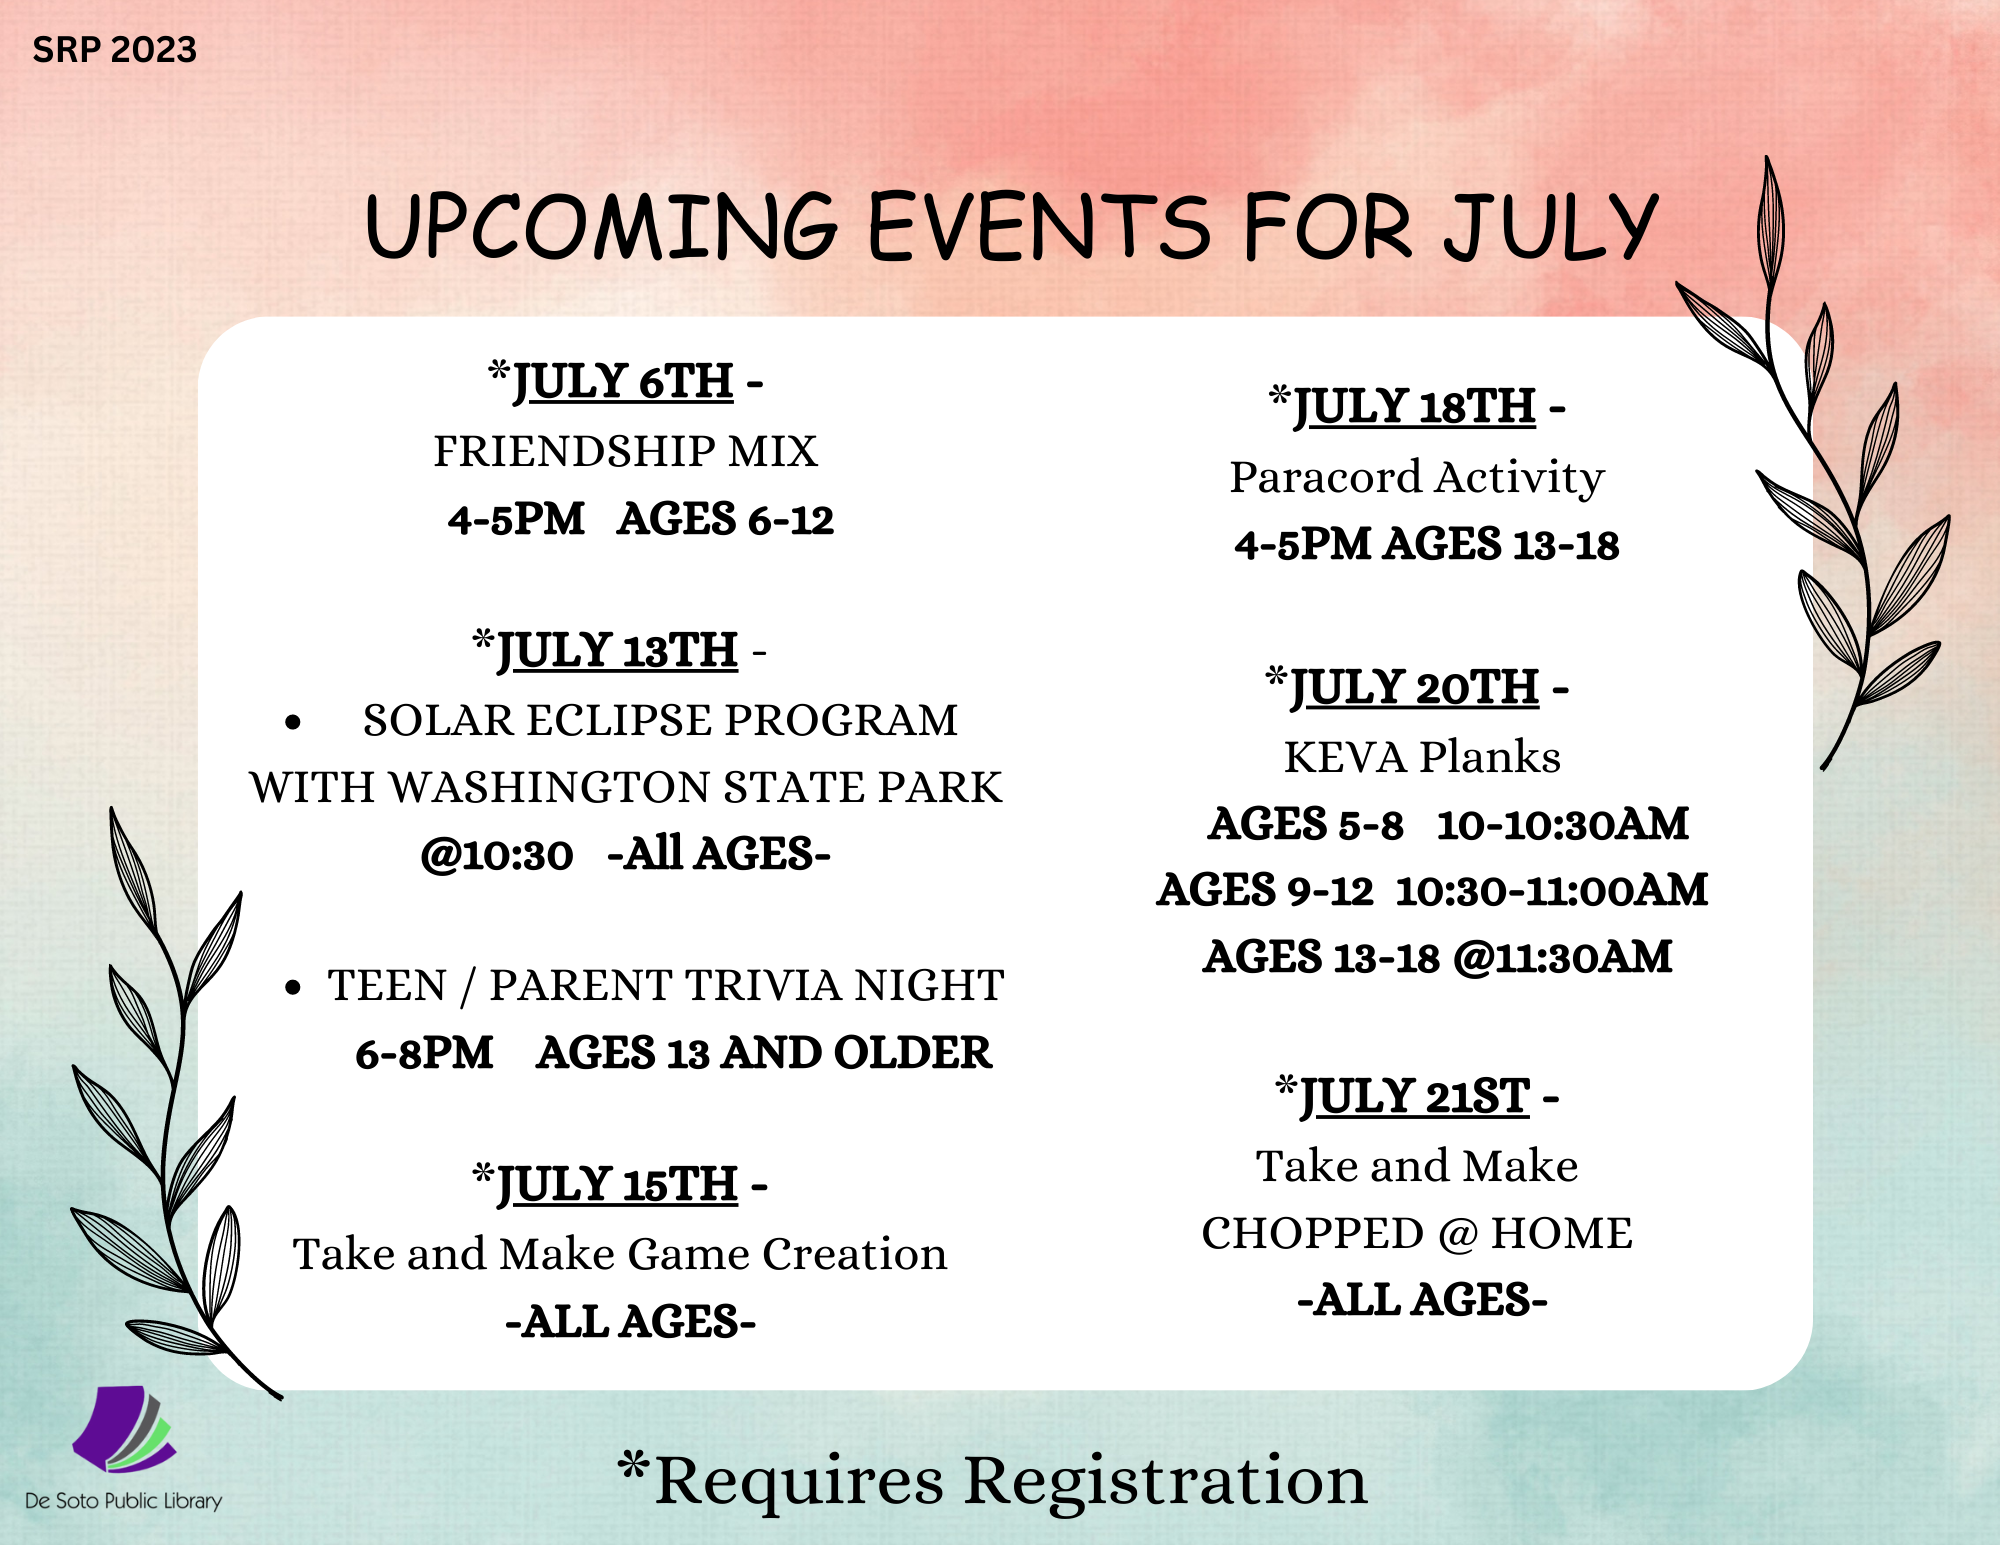 UPCOMING EVENTS FOR JULY 2023.png